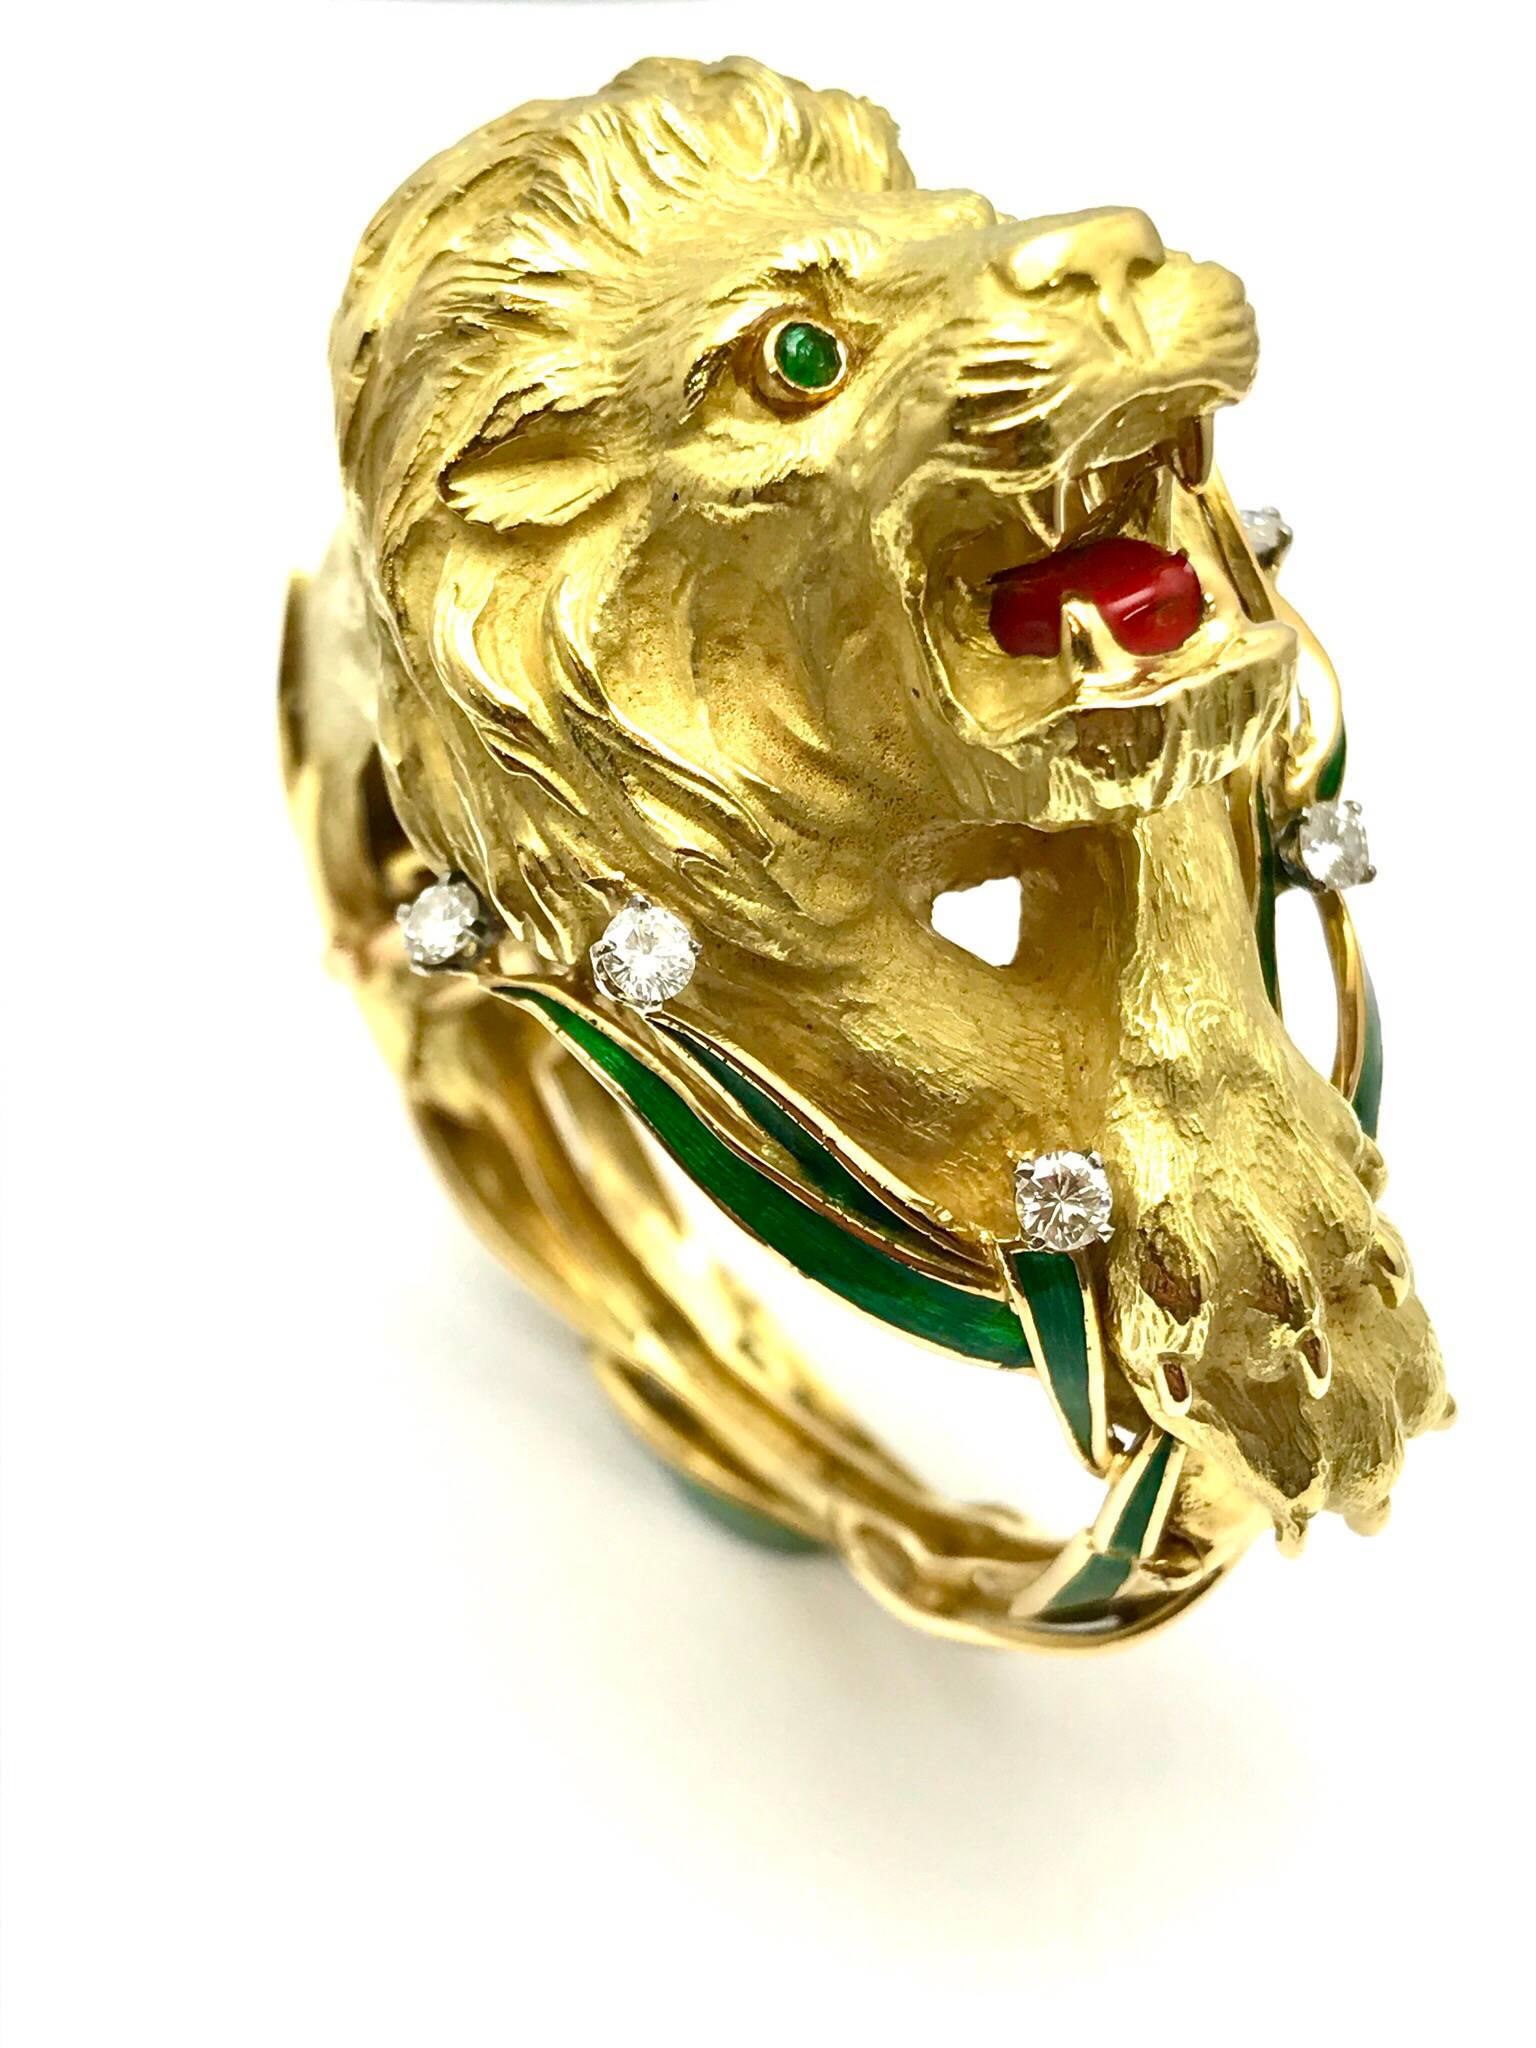 A round brilliant diamond and green and red enamel 18 karat yellow gold lion bangle bracelet.  The bracelet is designed as the lion sitting in the in the green enameled grass, letting out a mighty roar, exposing his red enameled tongue.  The lion is